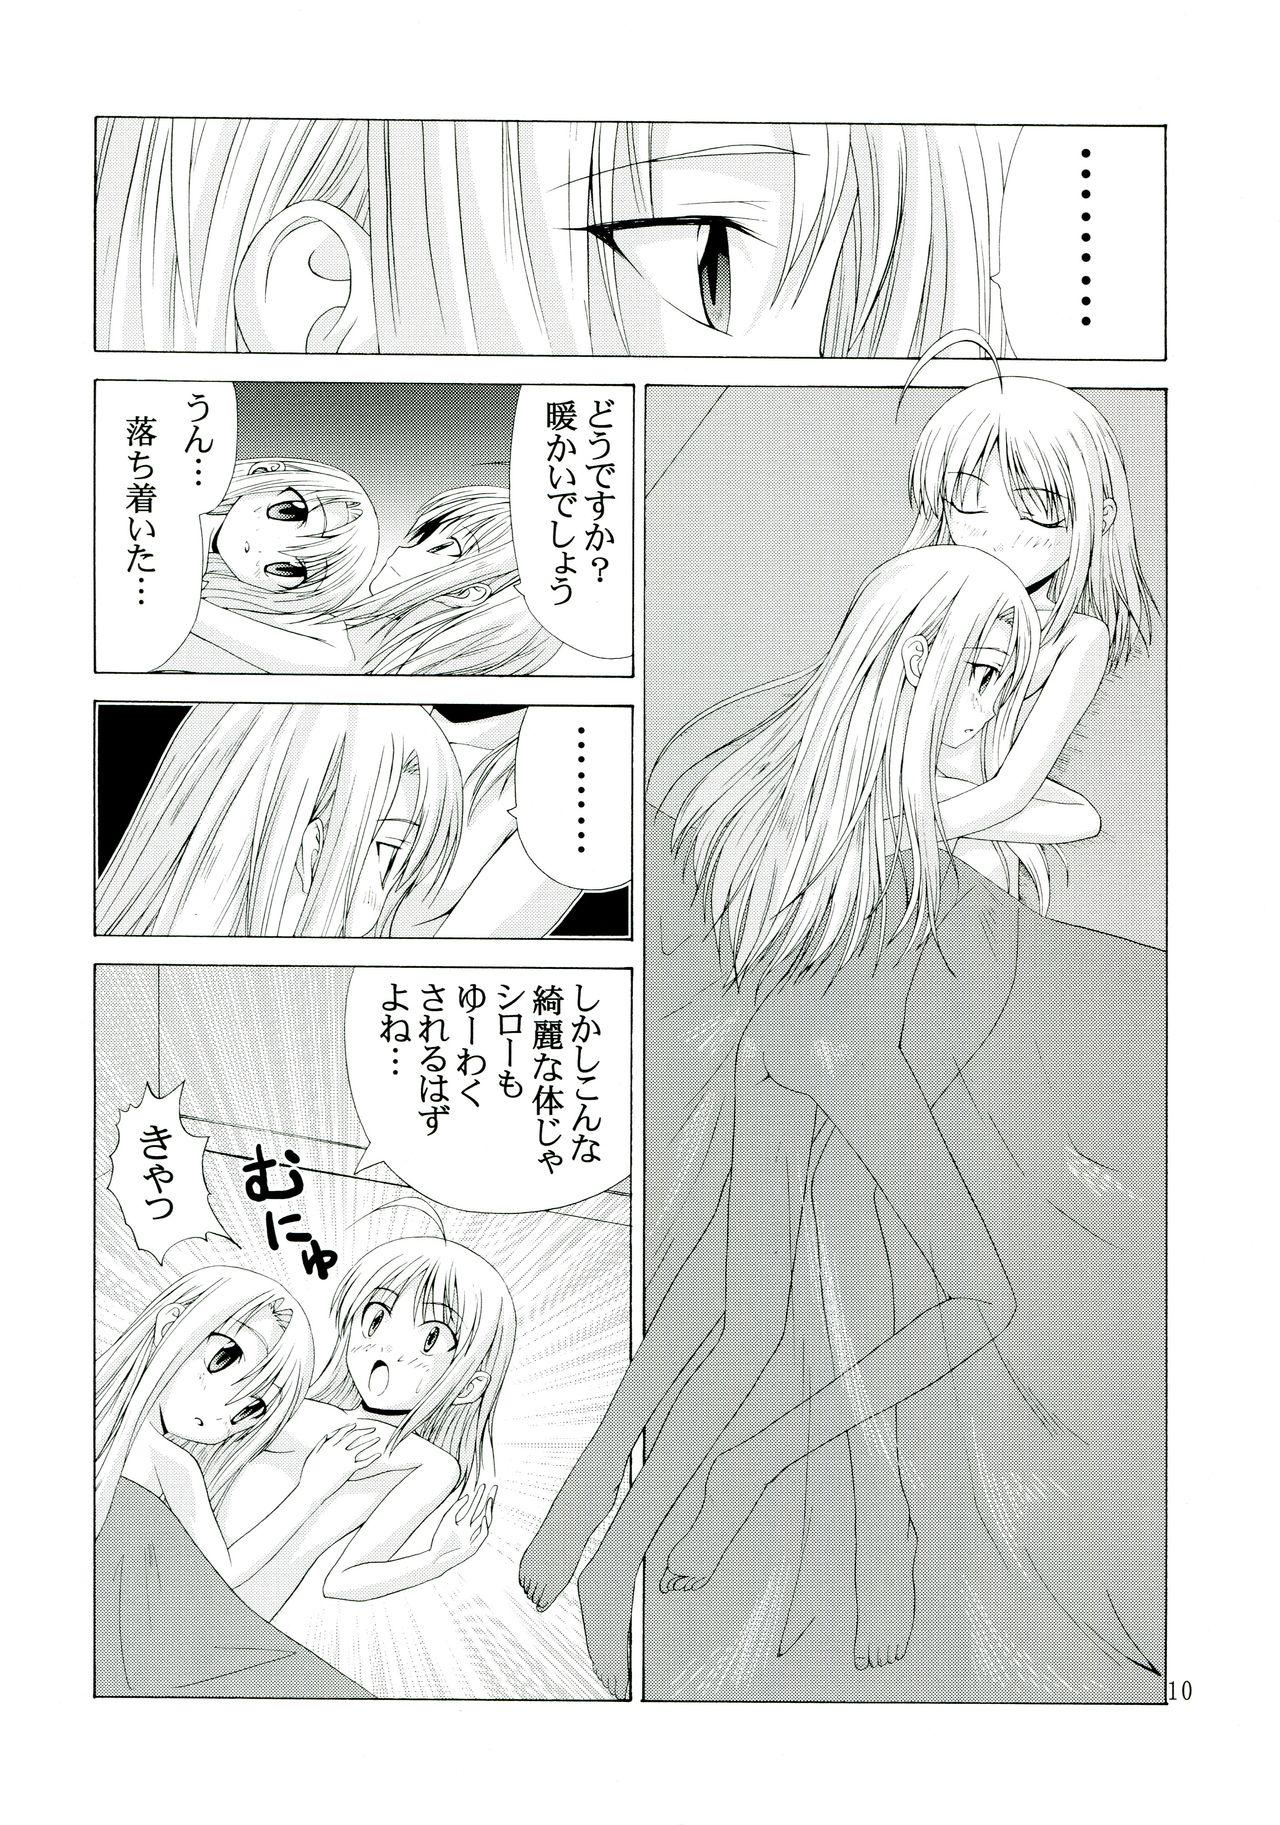 Ghetto PLATONIC MAGICIAN H - Fate stay night Missionary Porn - Page 10